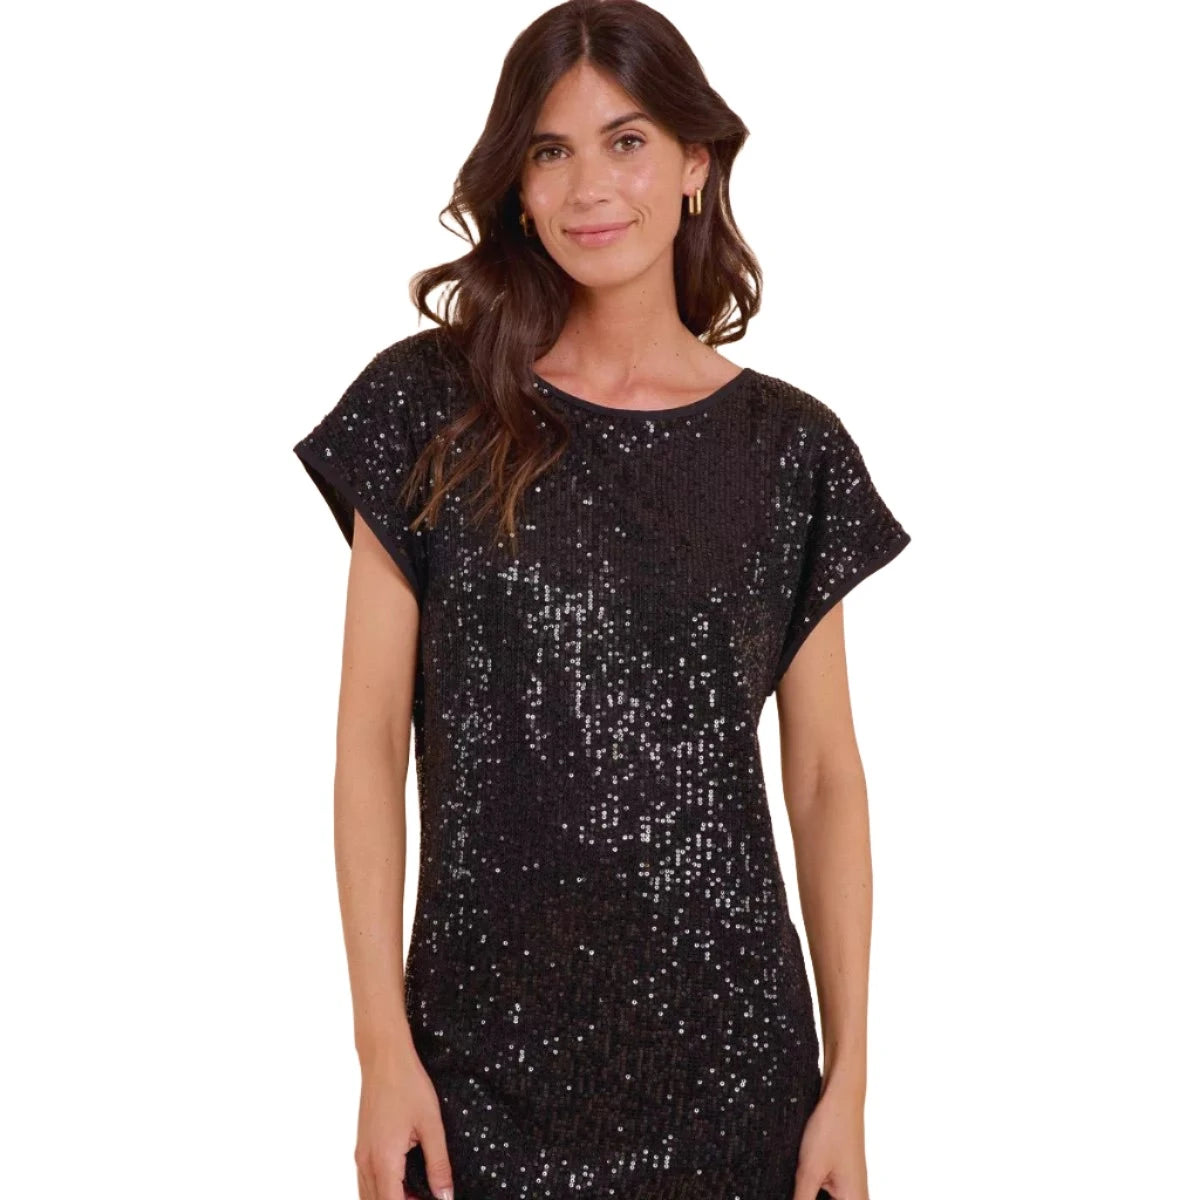 Sweewe Paris Sequined Mini Dress in Silver or Black - clever alice